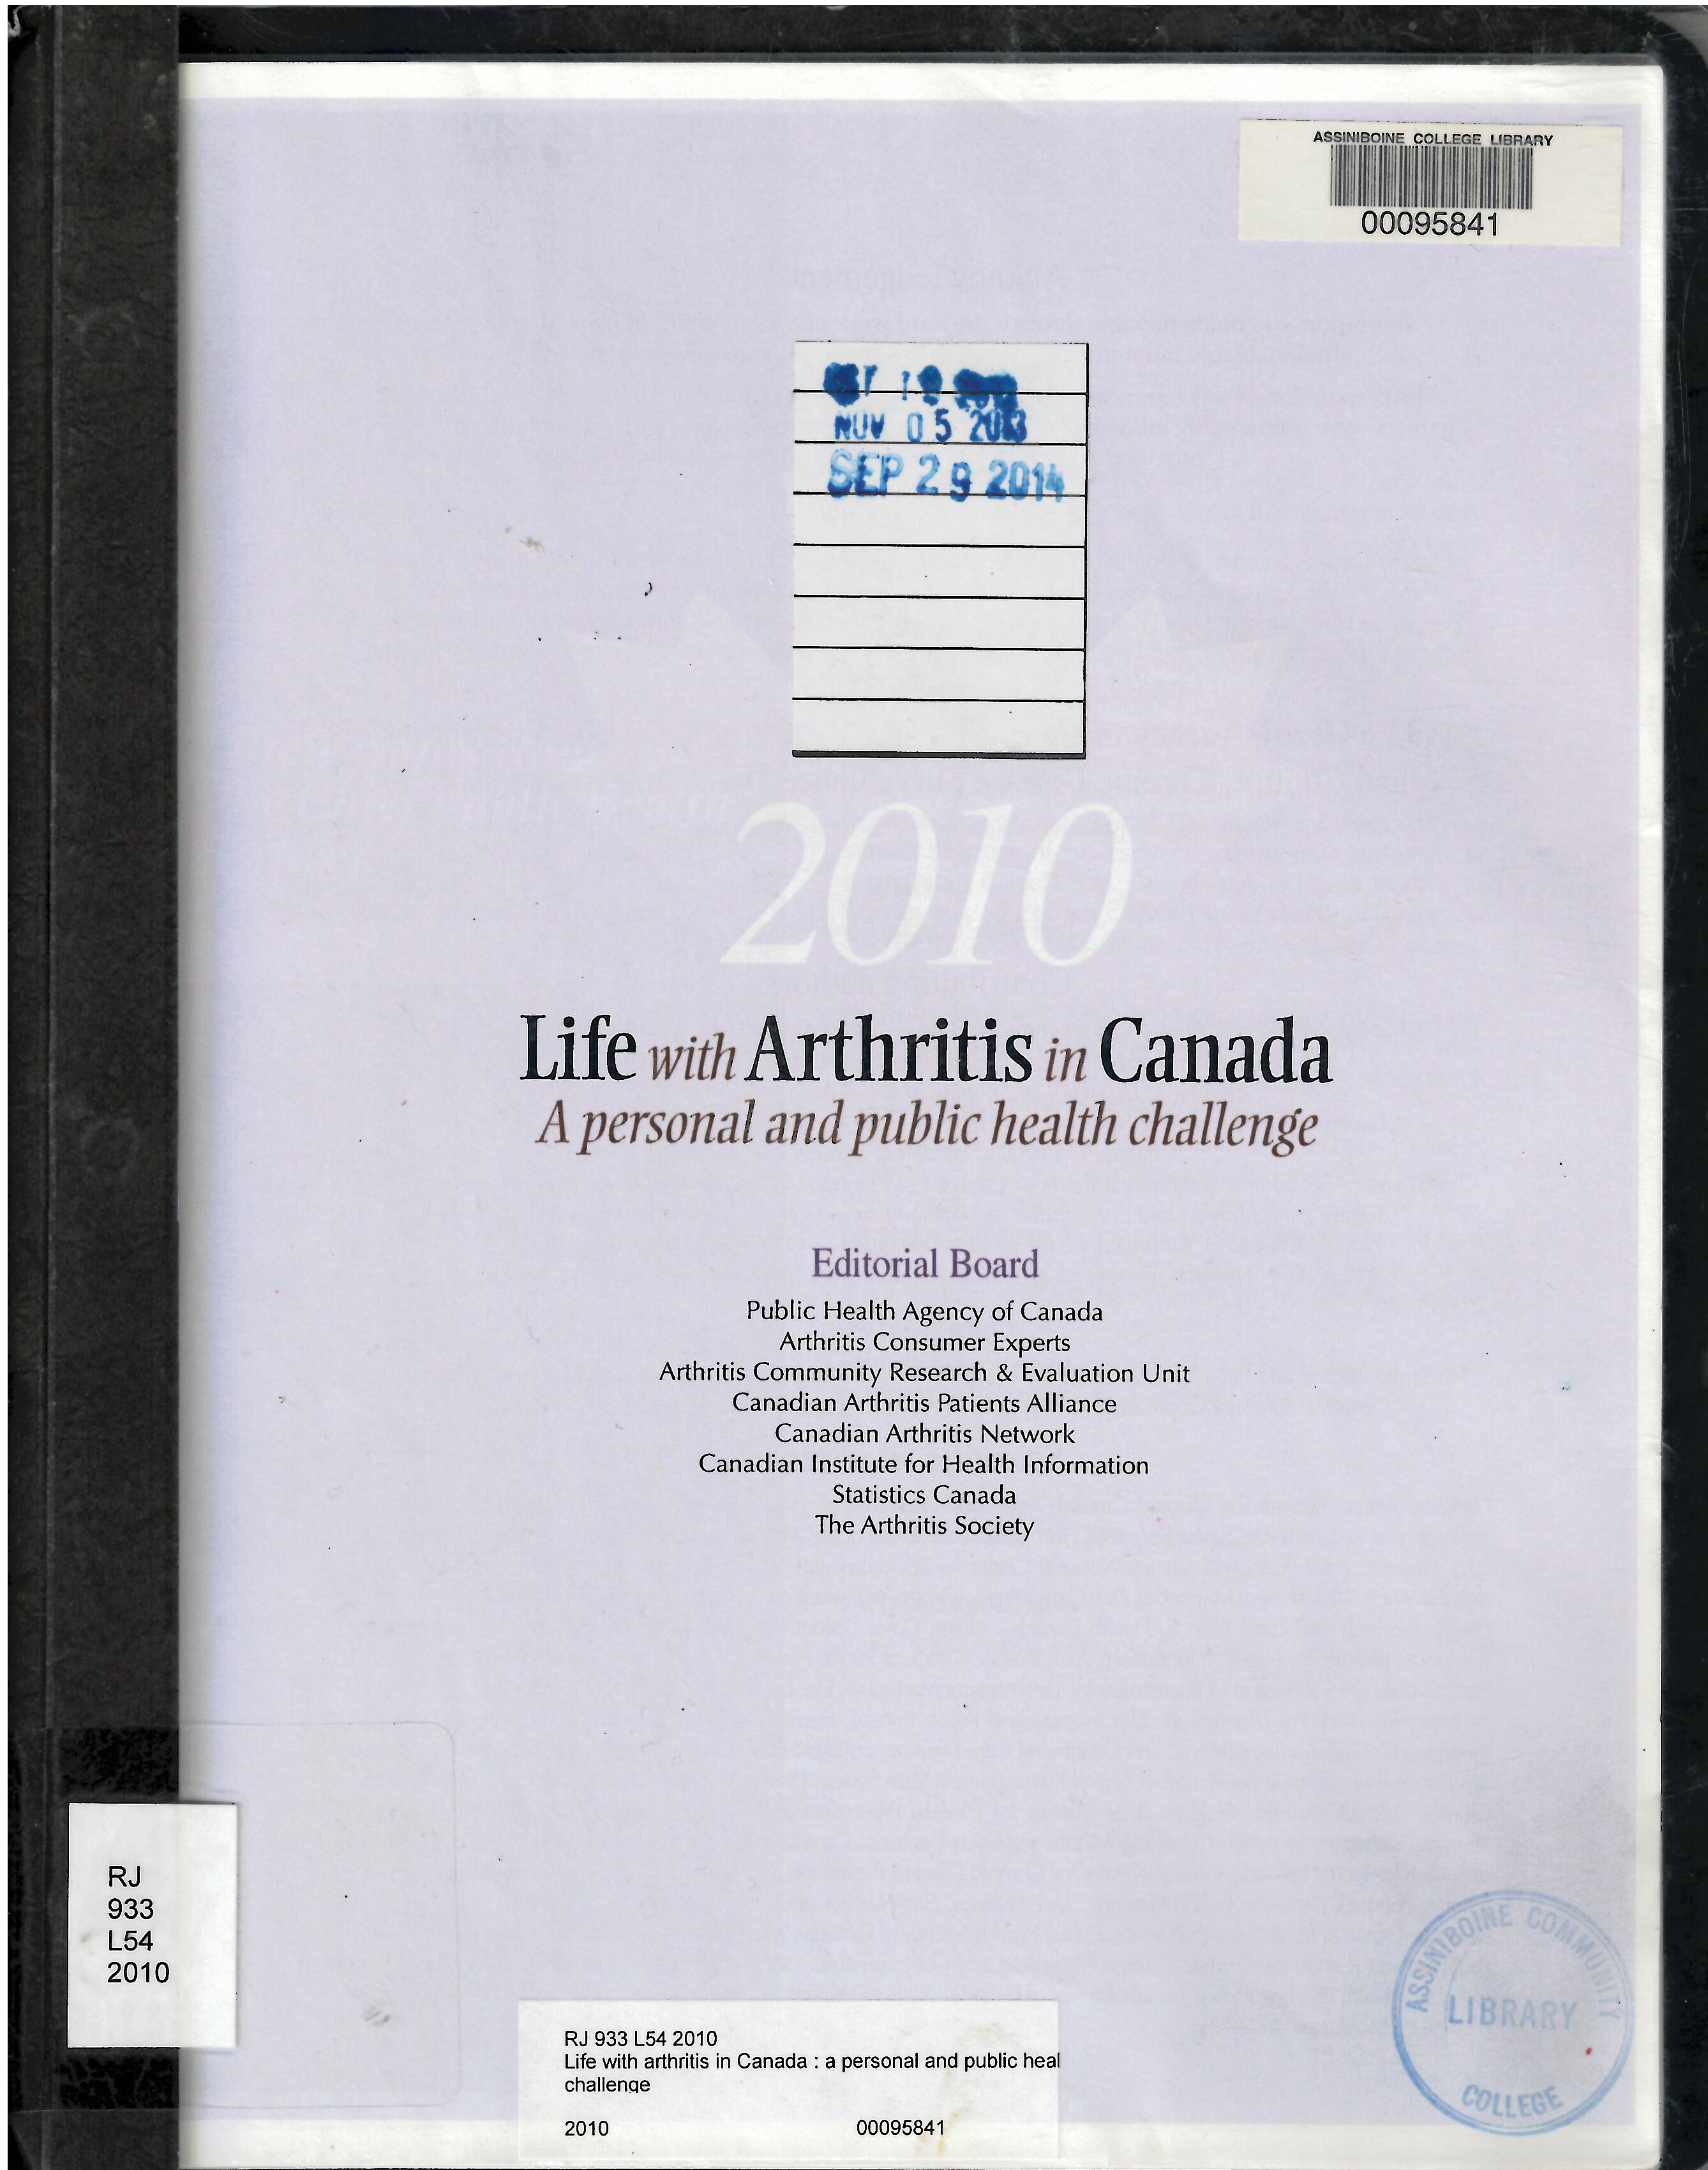 Life with arthritis in Canada : a personal and public health challenge